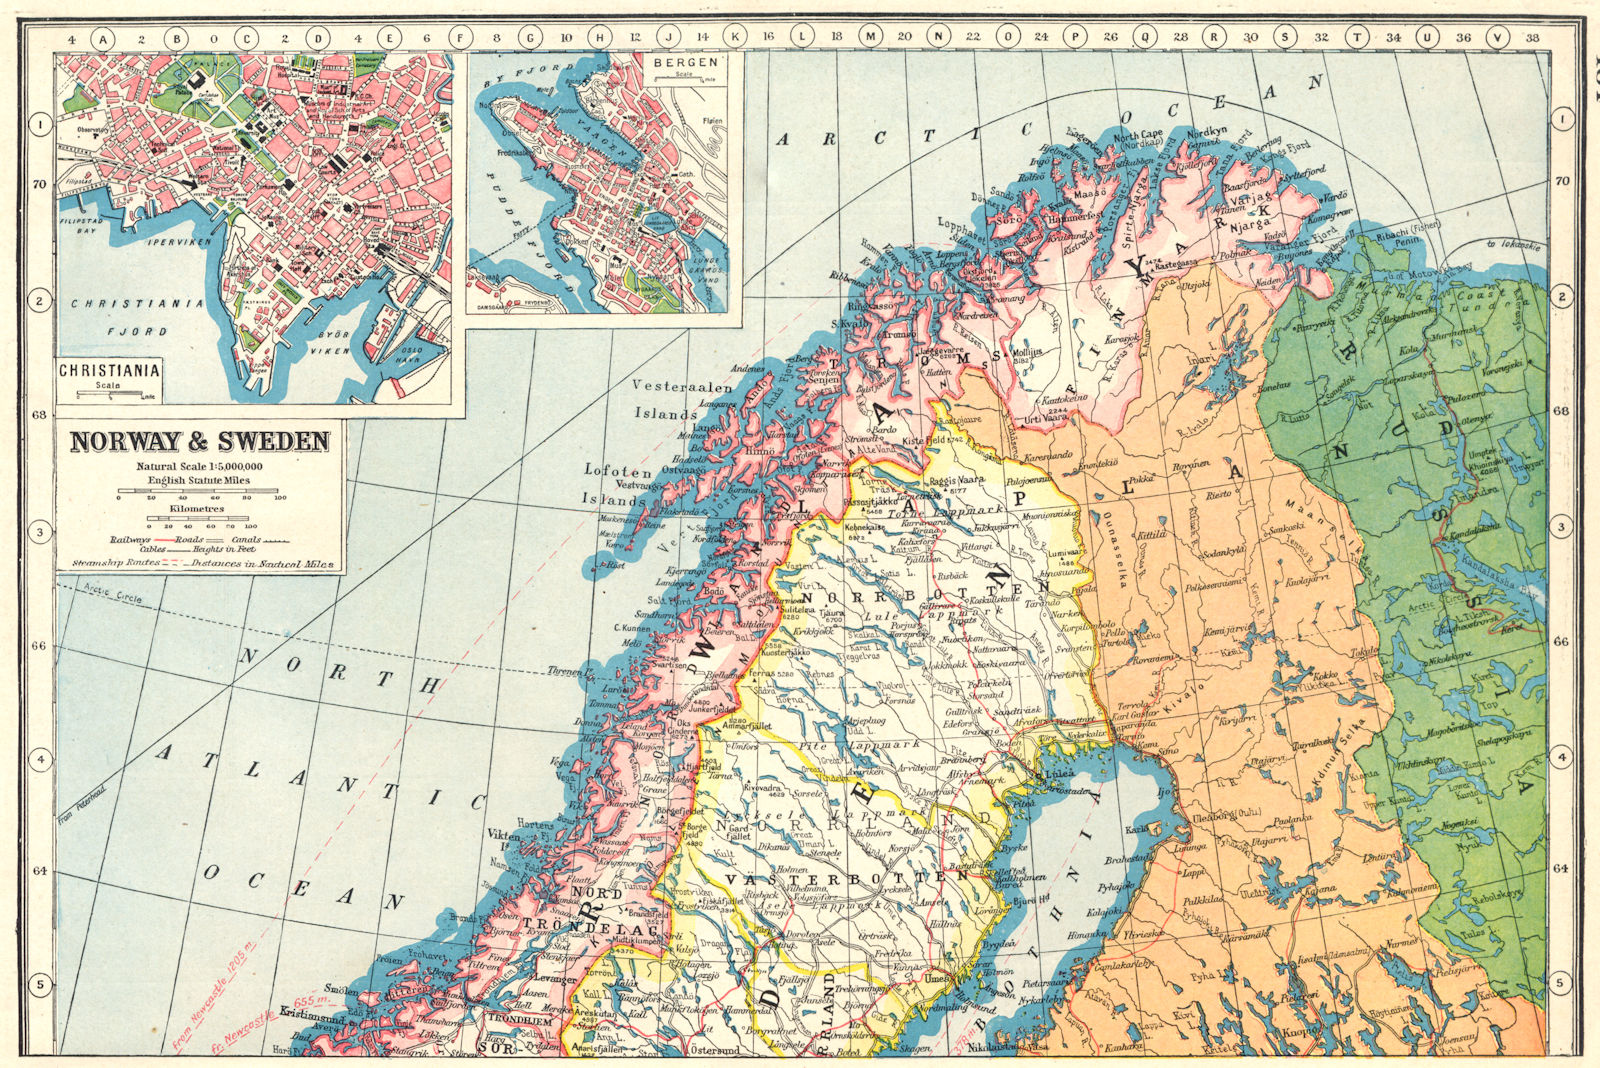 Associate Product SCANDINAVIA NORTH. Norway & Sweden;inset Oslo Christiania;Bergen 1920 old map